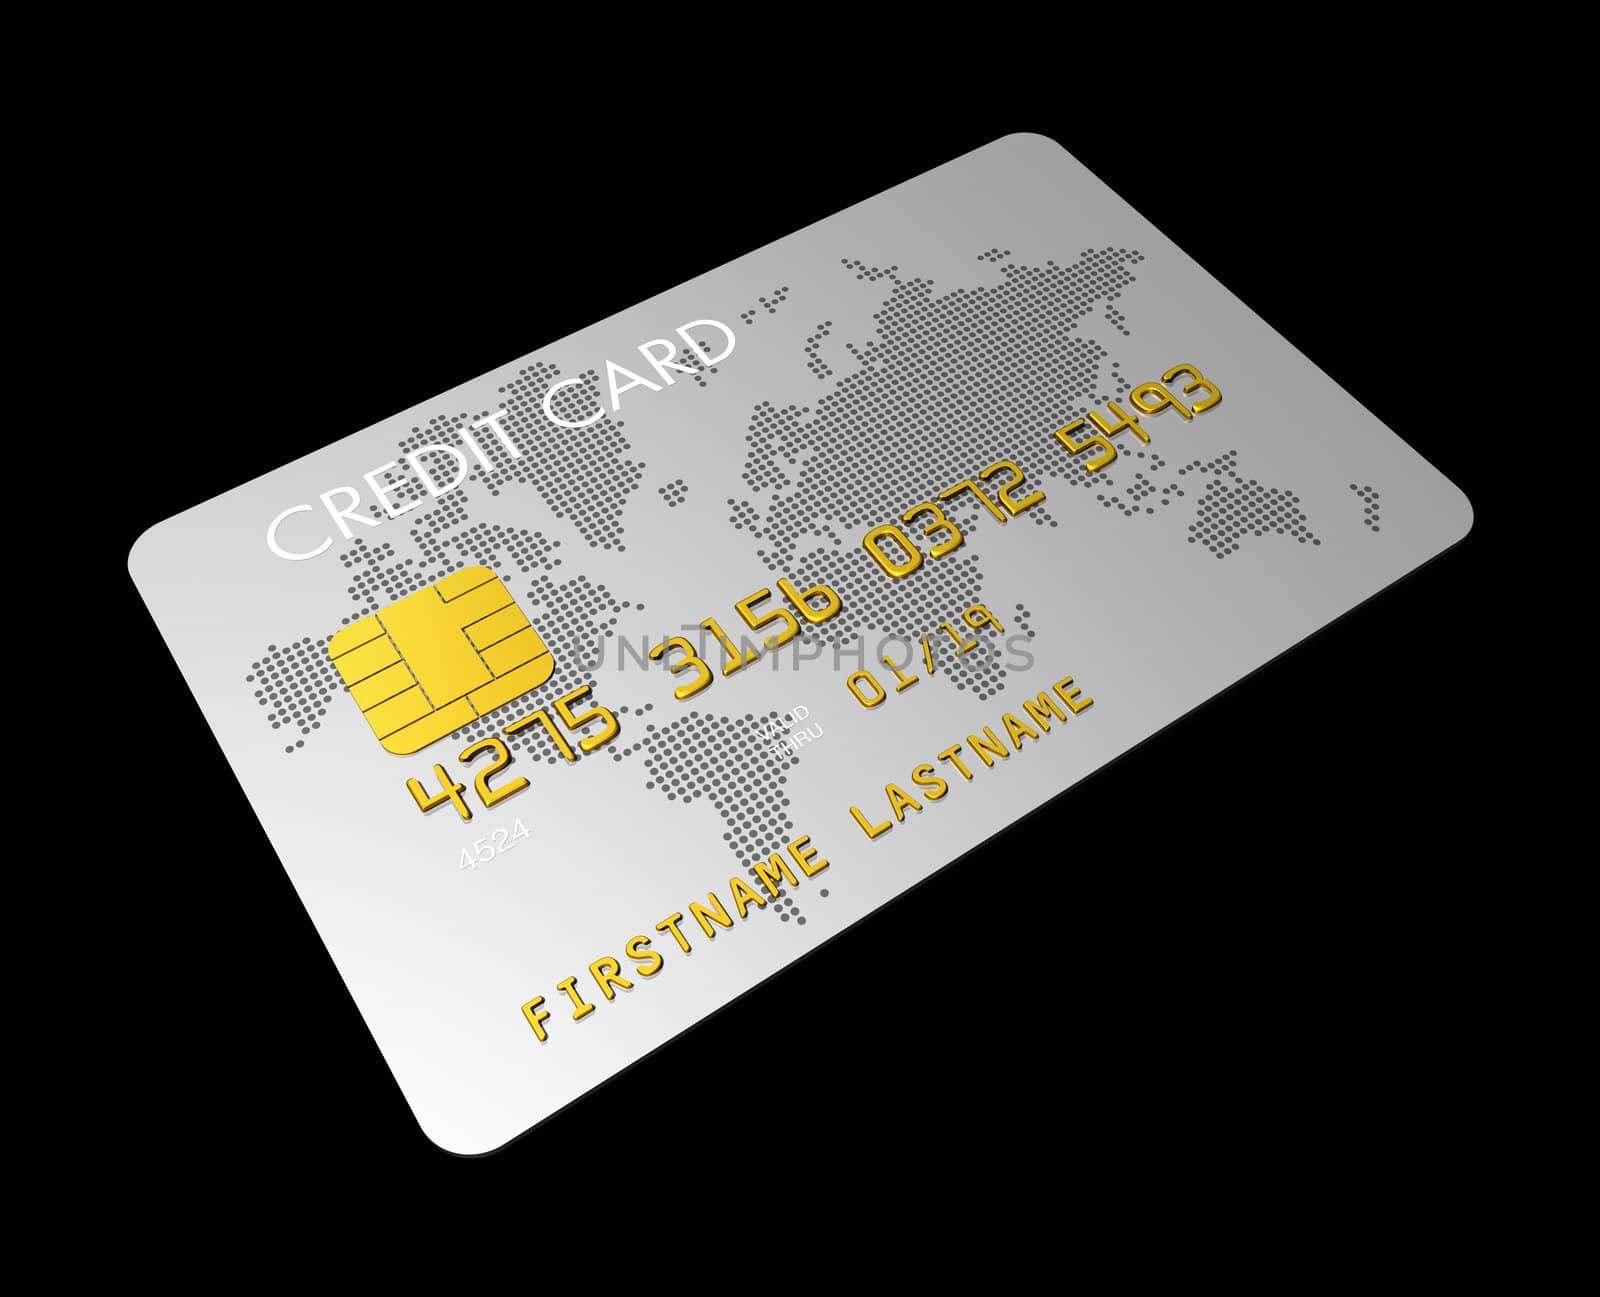 silver credit card by daboost